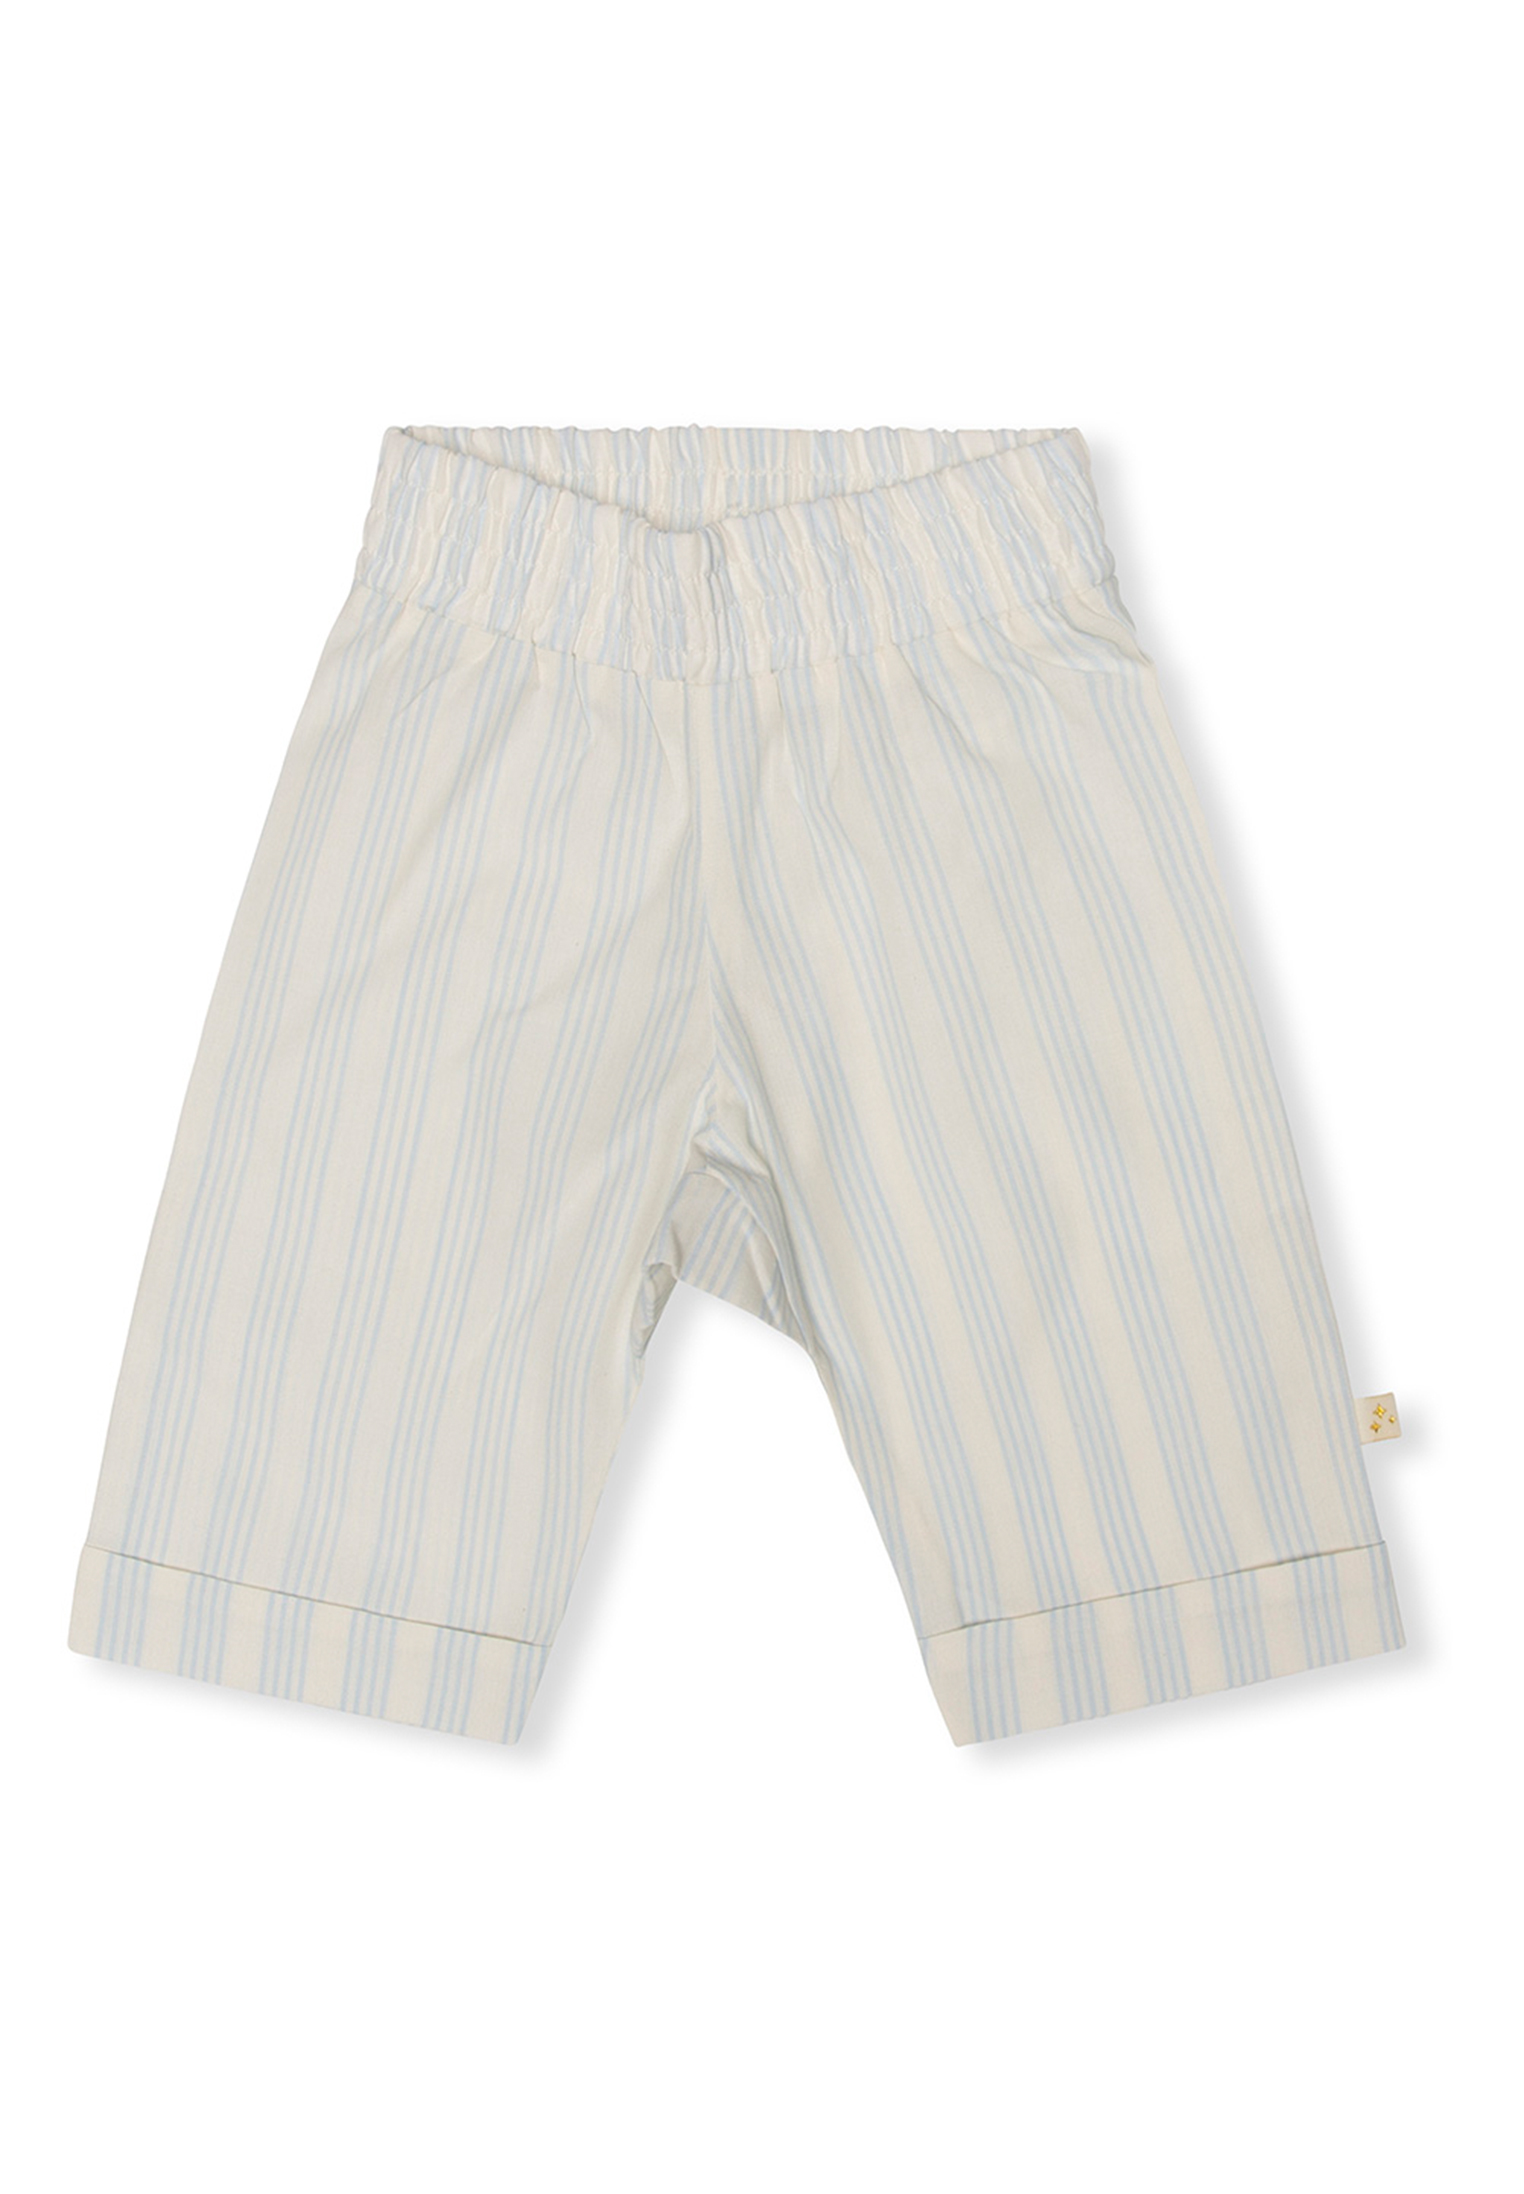 MAMA.LICIOUS Baby-trousers -Skywriting - 88888751